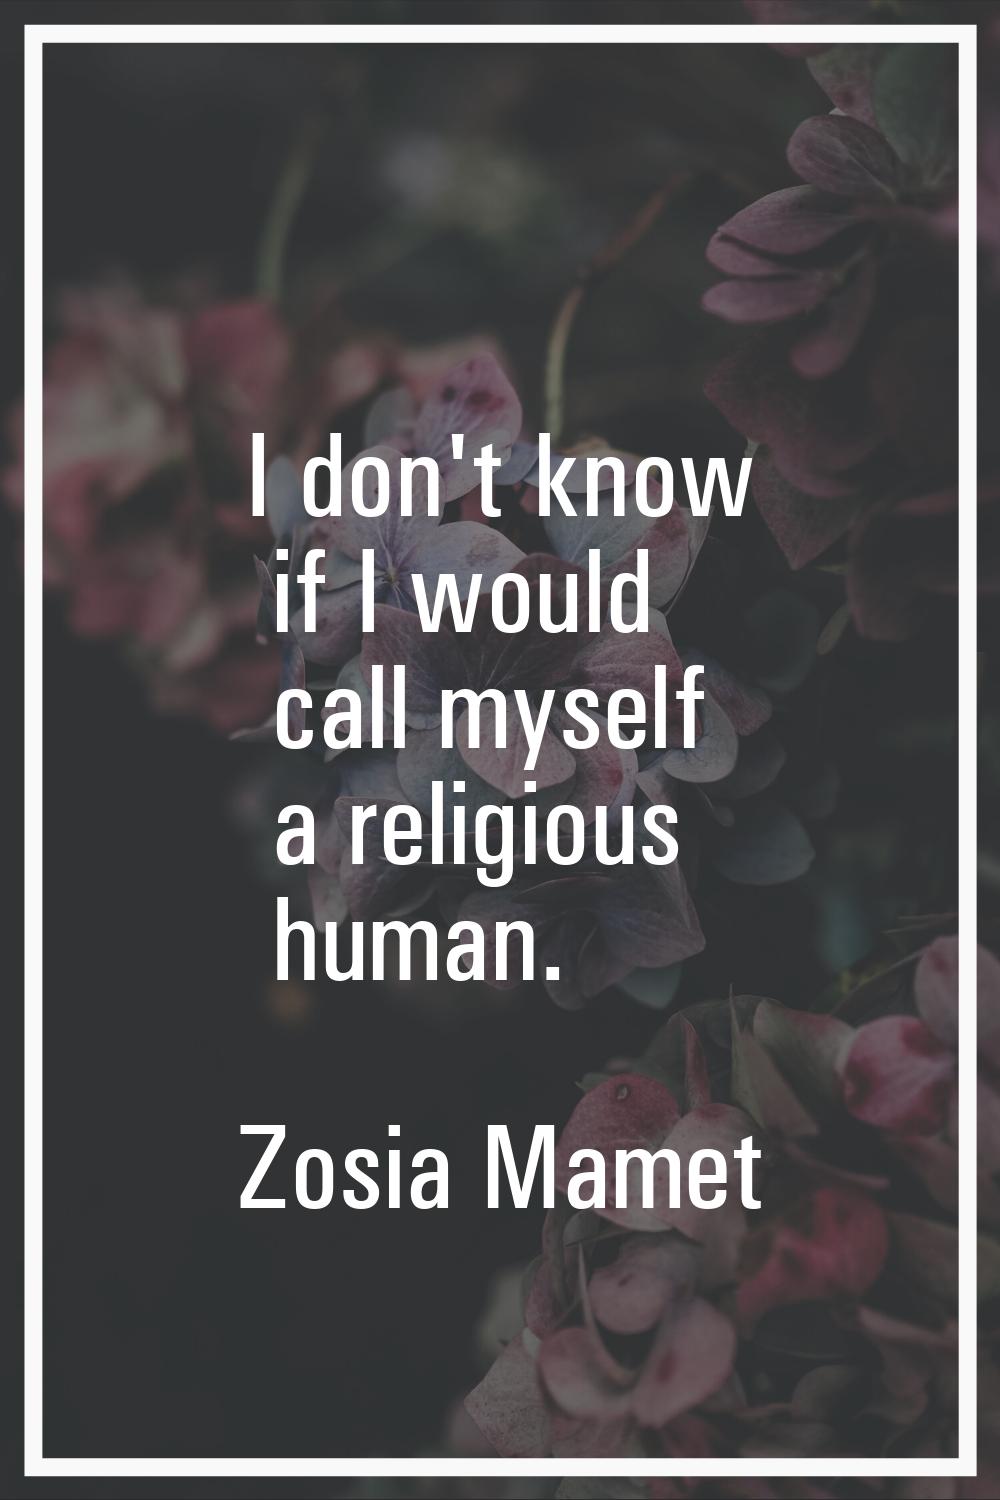 I don't know if I would call myself a religious human.